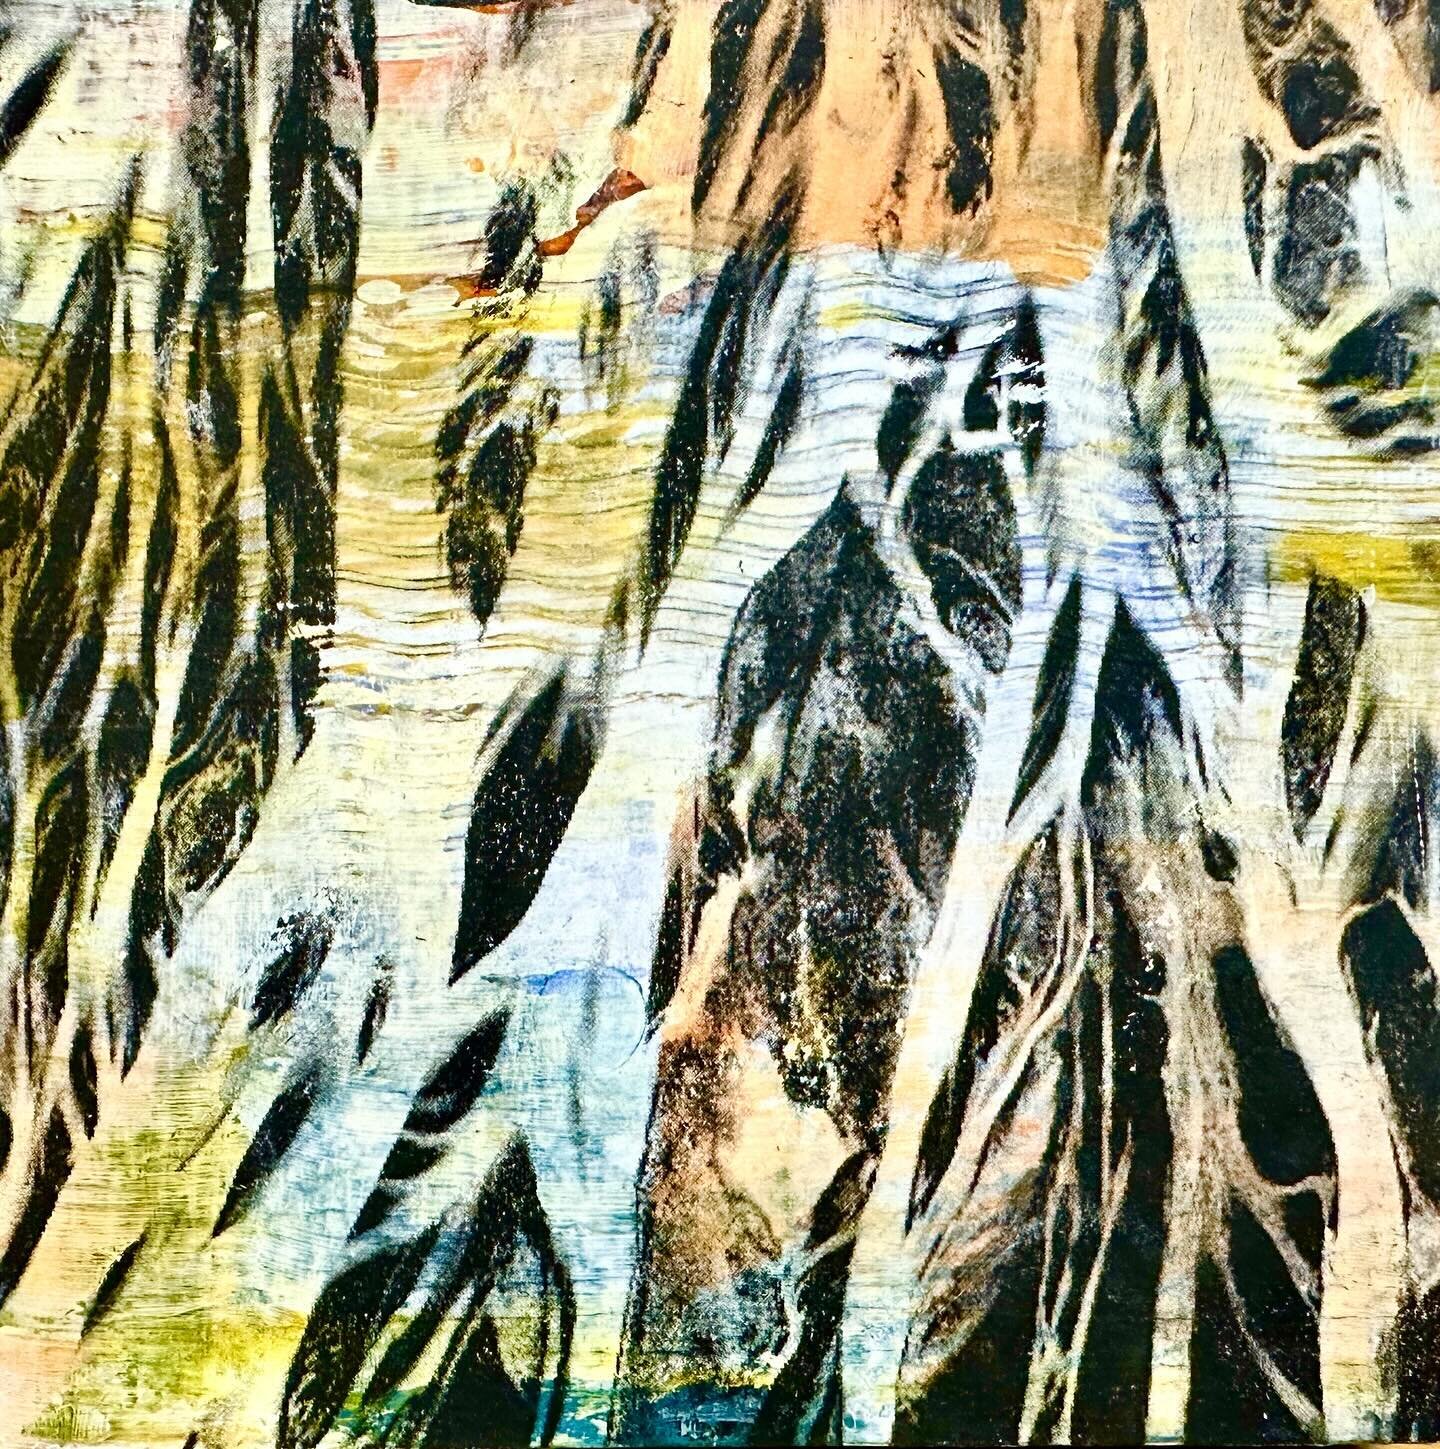 Working on more river systems in my paintings, and this image reminds me of tree roots, which is my other favorite subject. Funny how all things connect and reflect each other. Work in progress 😊 #wipart